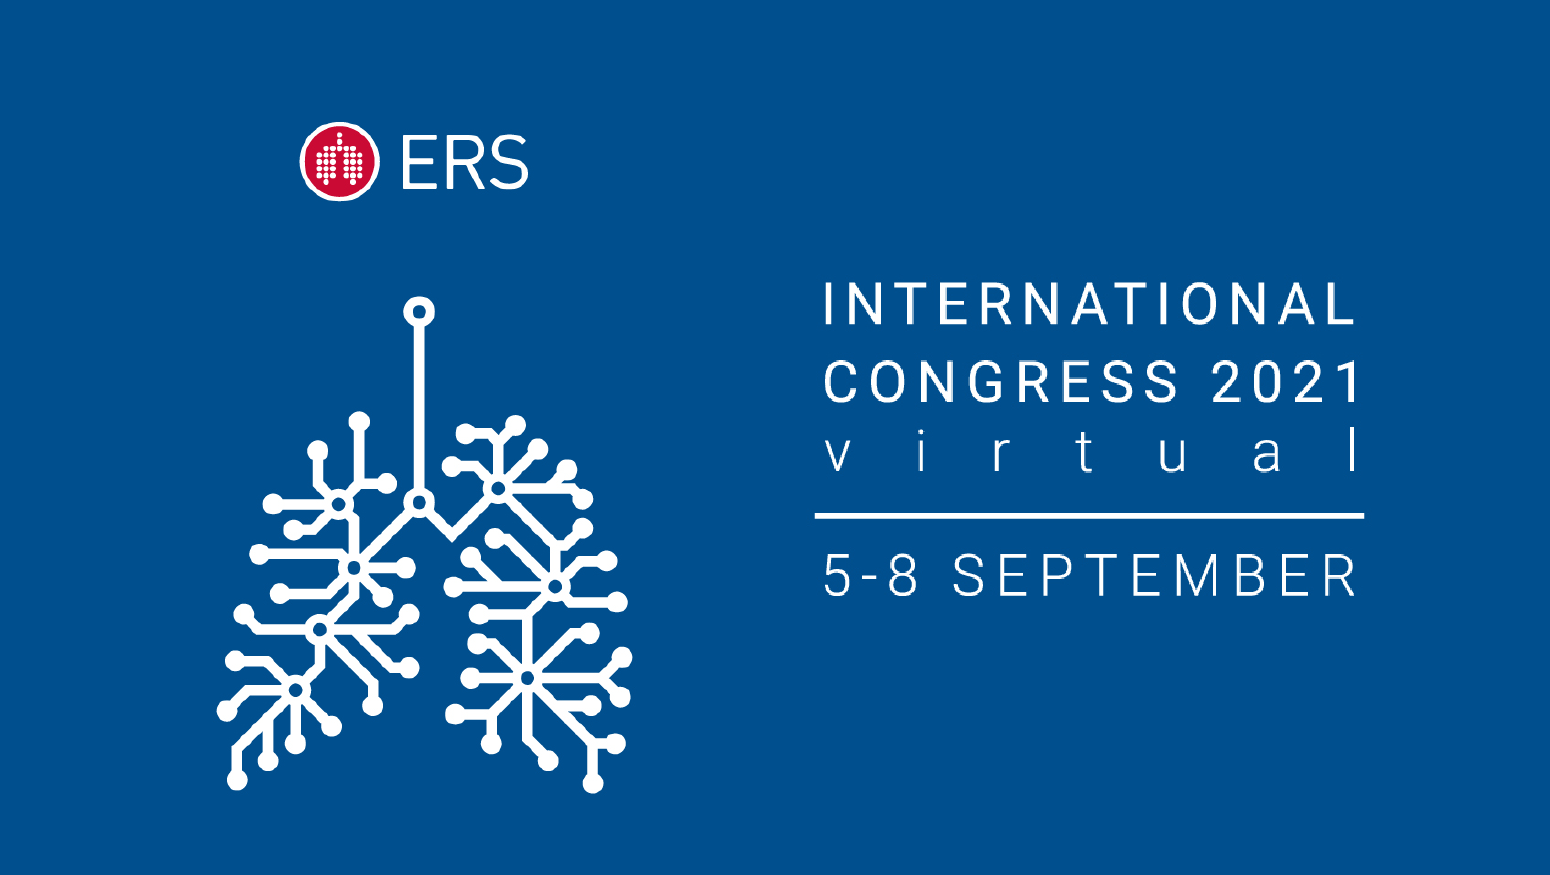 ERS Virtual Congress 2021 (Event Page)